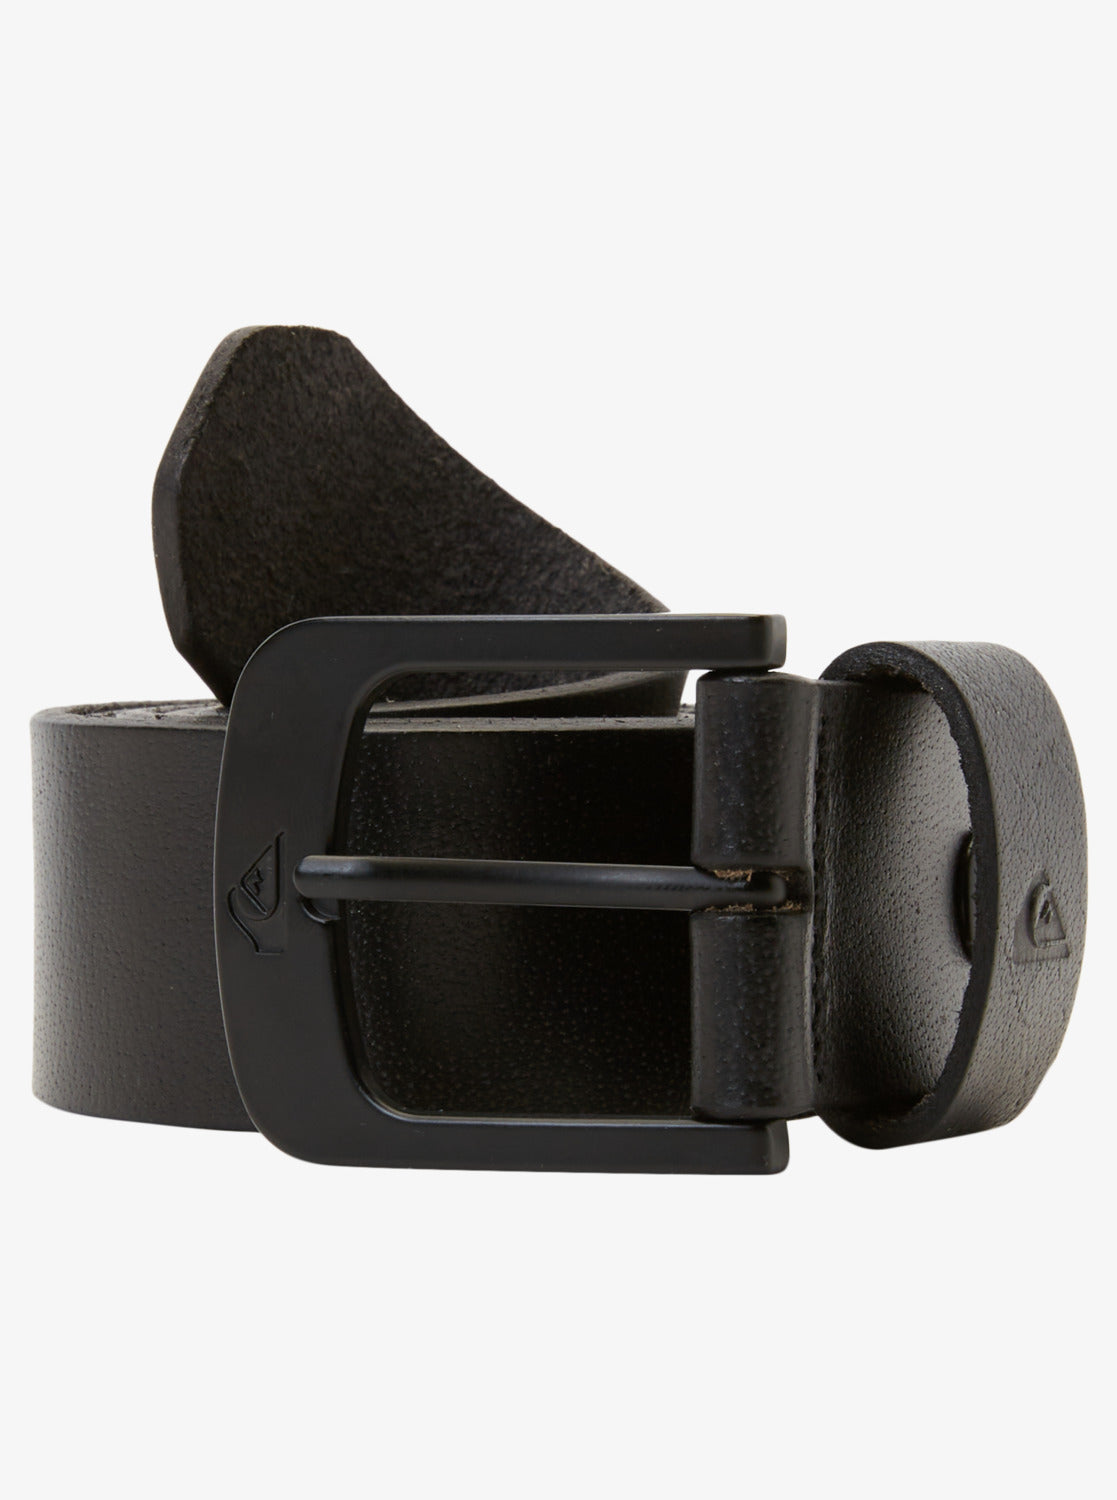 The Everydaily Leather Belt - Black